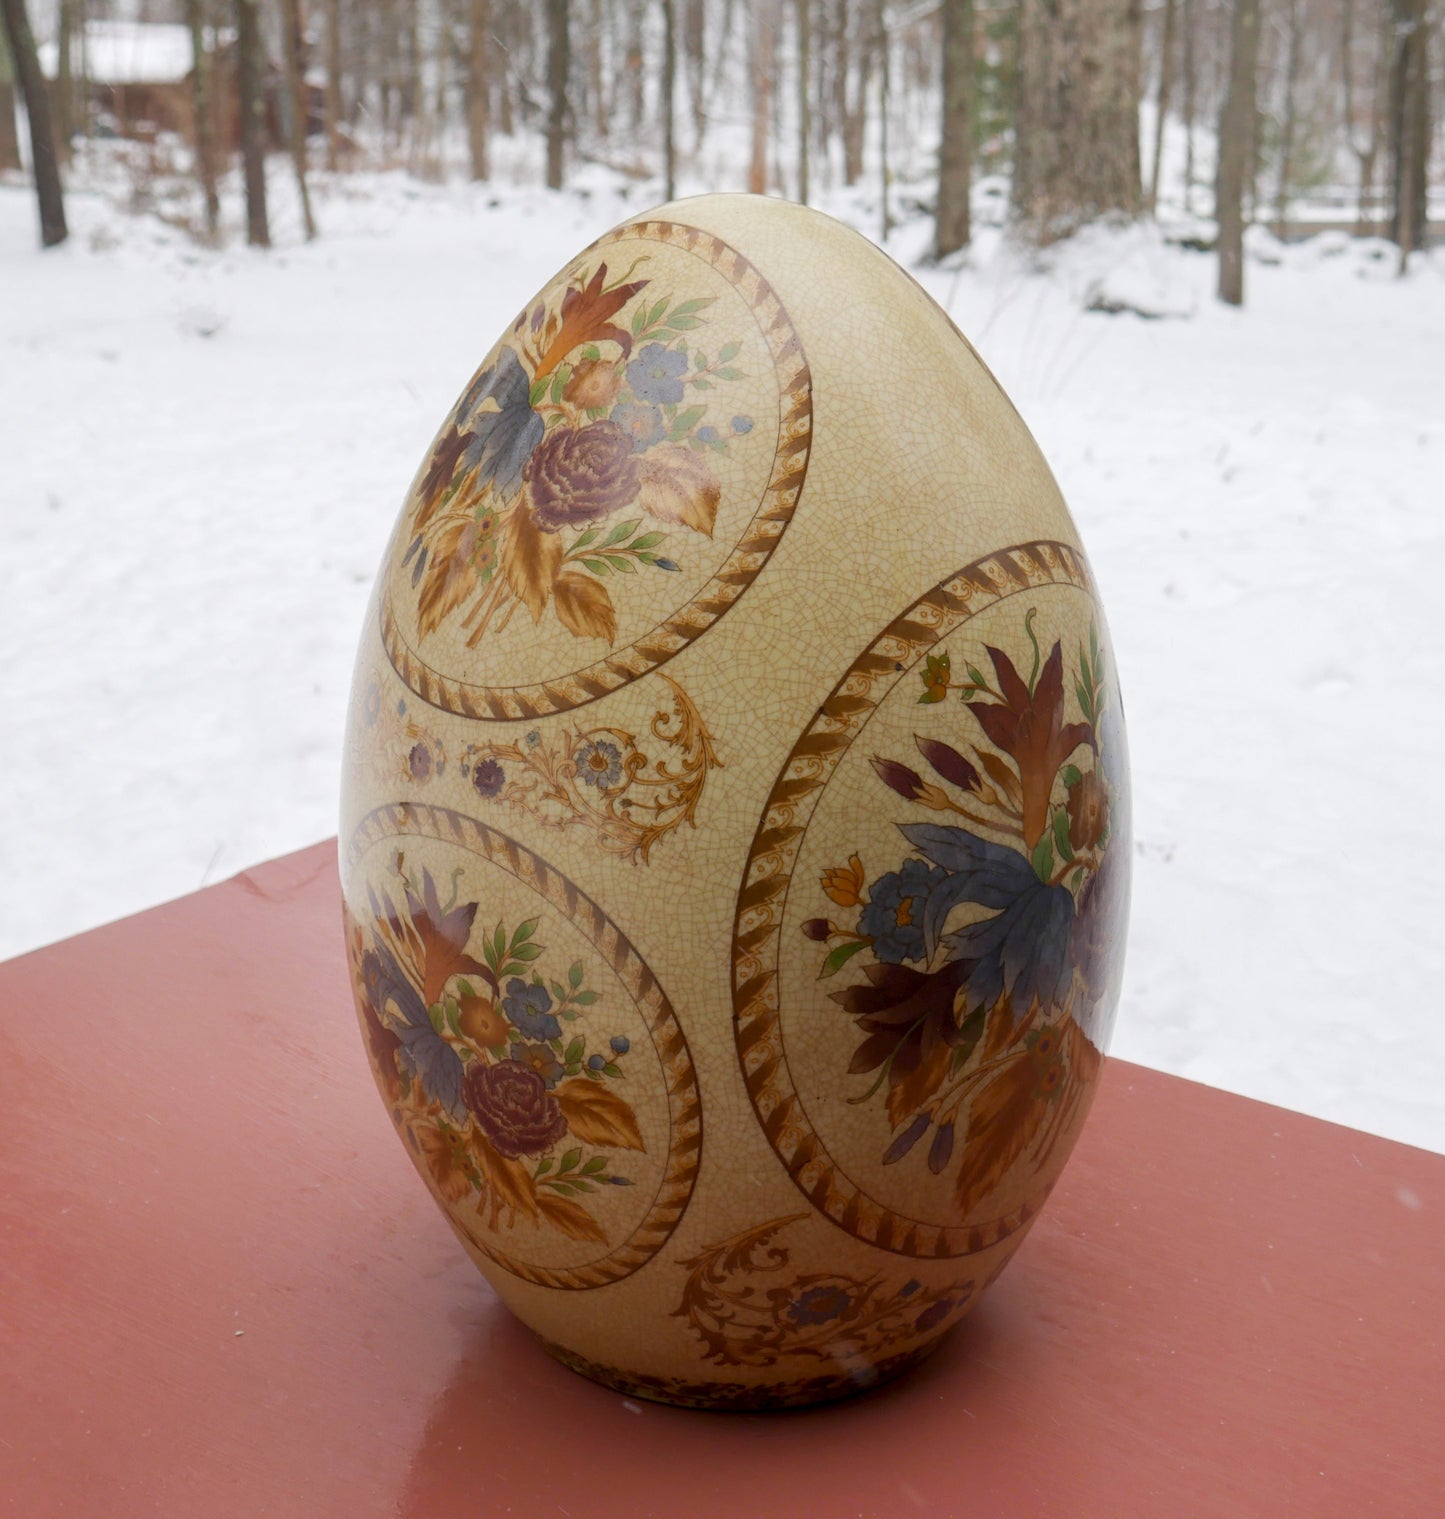 Huge Ceramic Egg 18" Tall | 14 Pounds Giant Handcrafted and Hand Painted Egg VTG